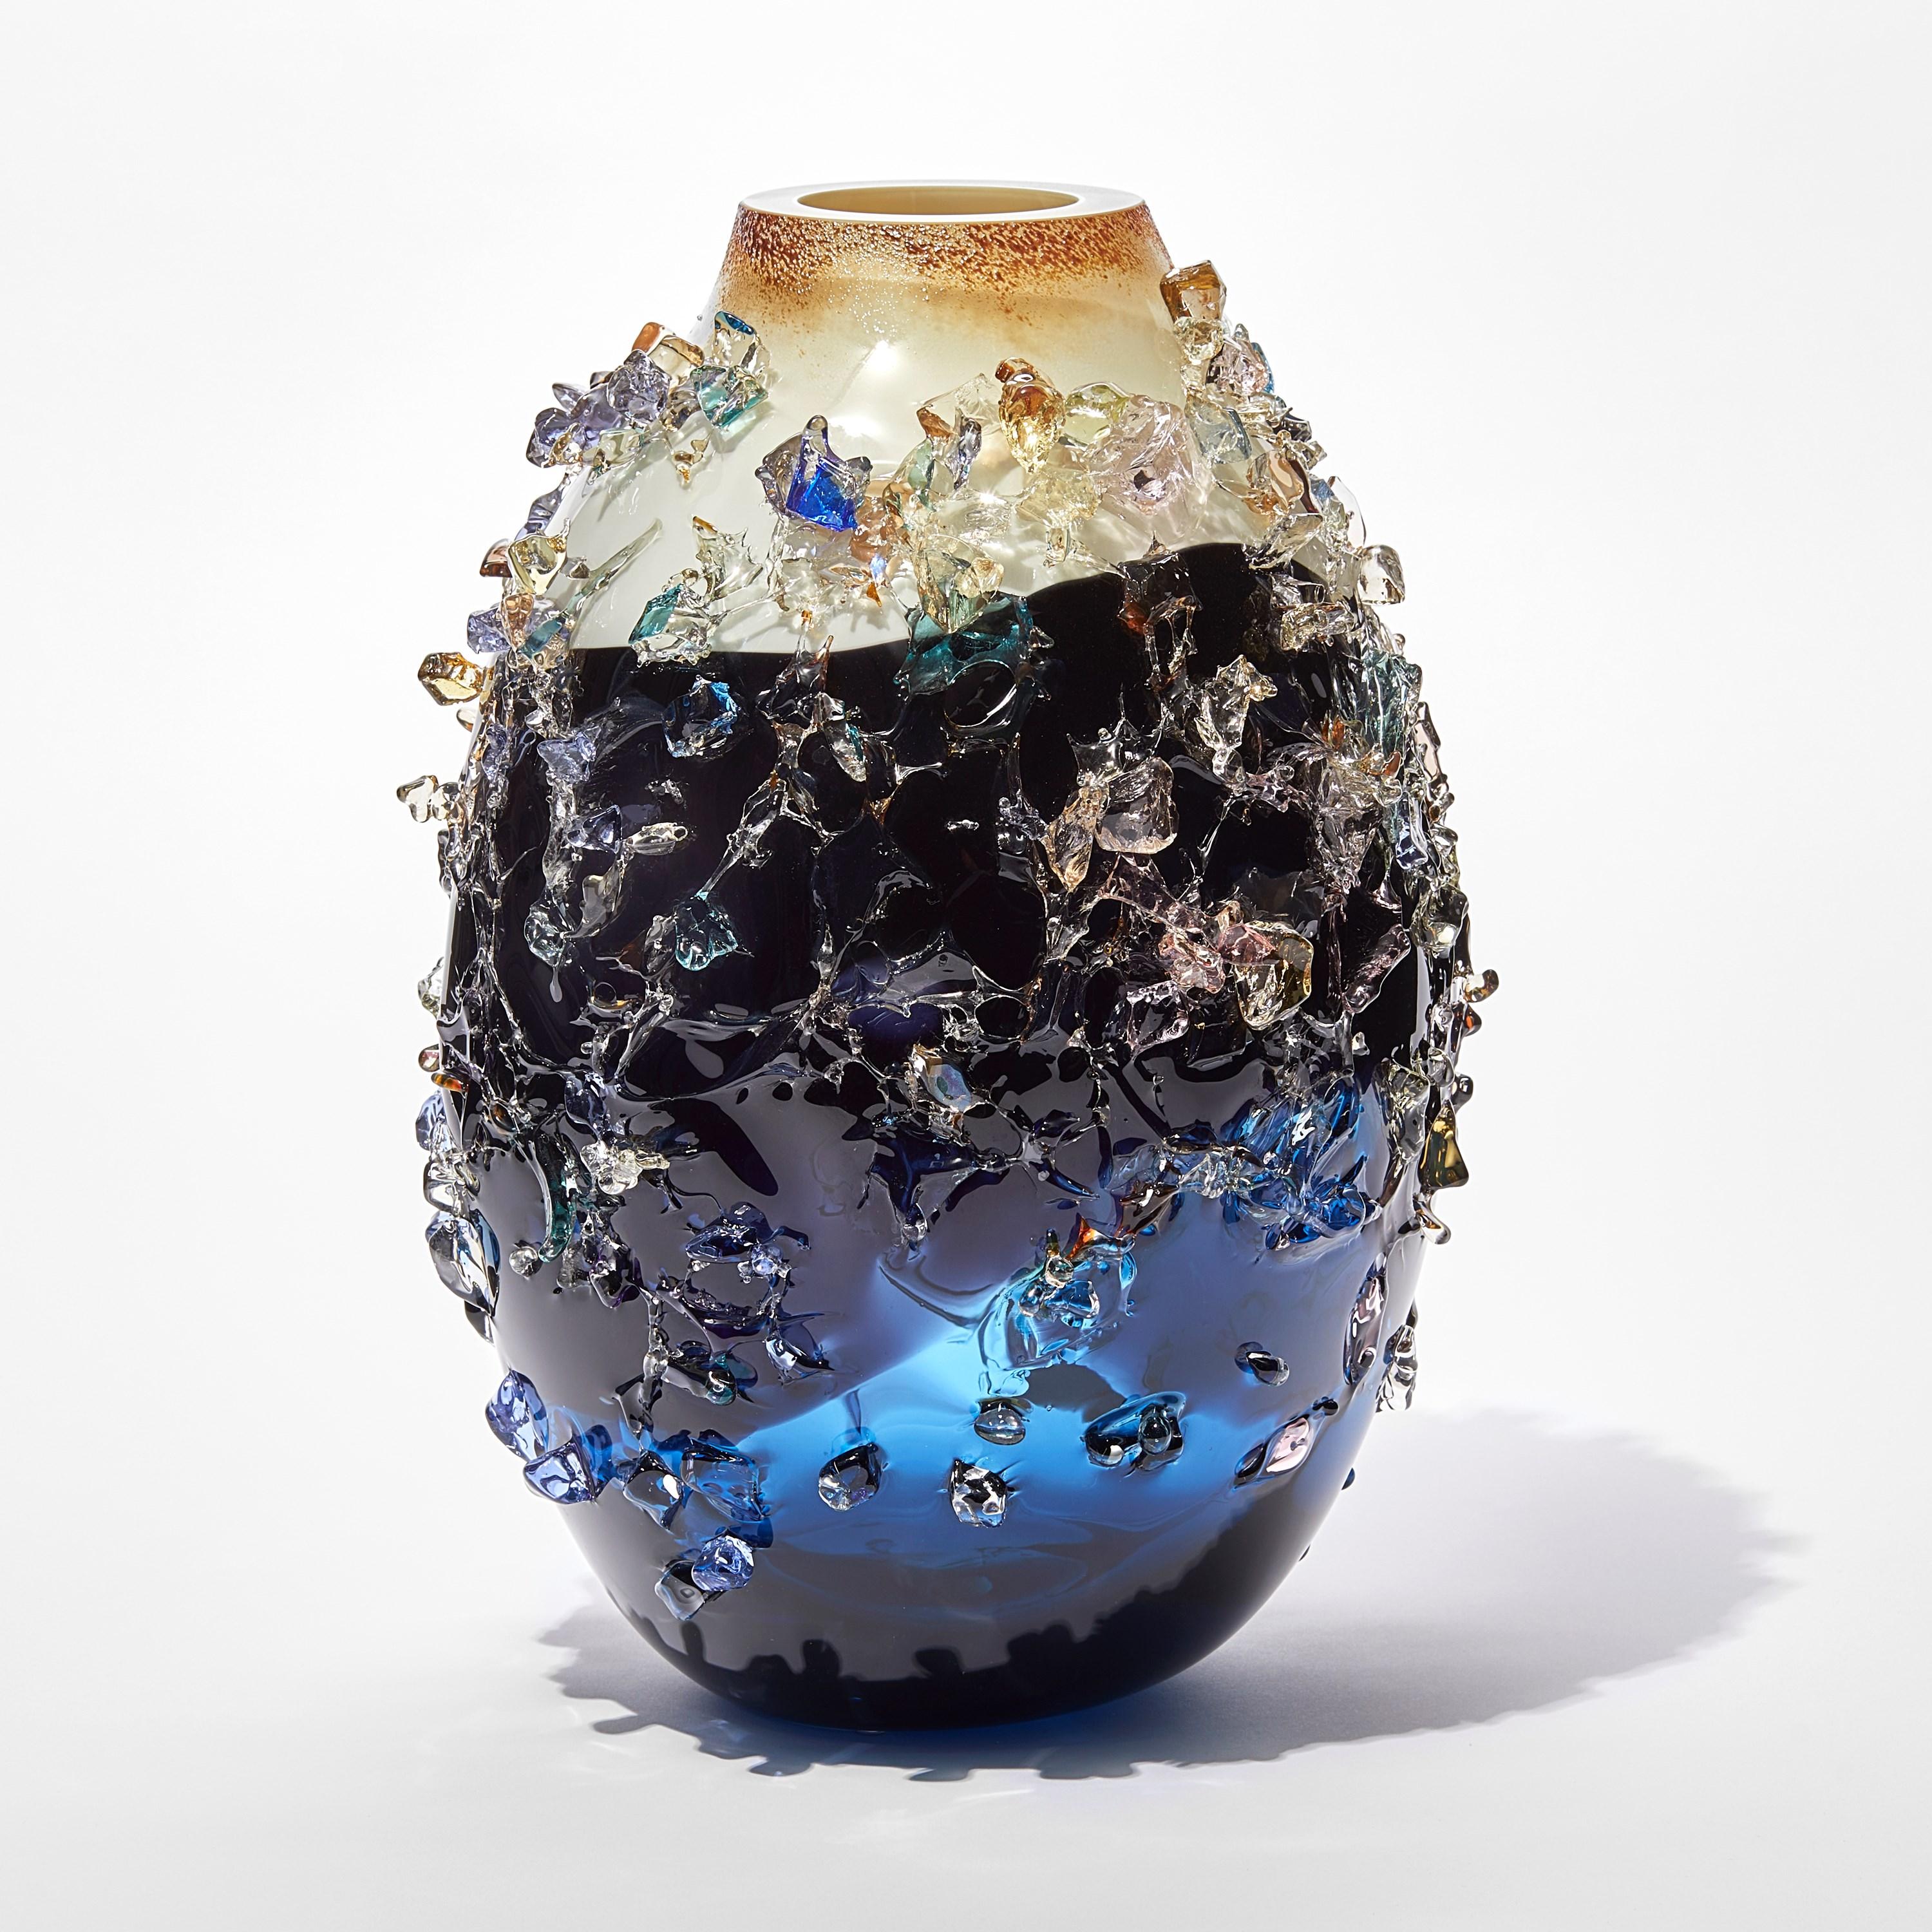 Sakura TFO23031 is a unique blue, indigo, cream and multicolored hand-blown art glass sculptural vase, covered in an organic glass shard adornment by the Dutch artist Maarten Vorlijk. The piece is flame polished to soften the edges of all the